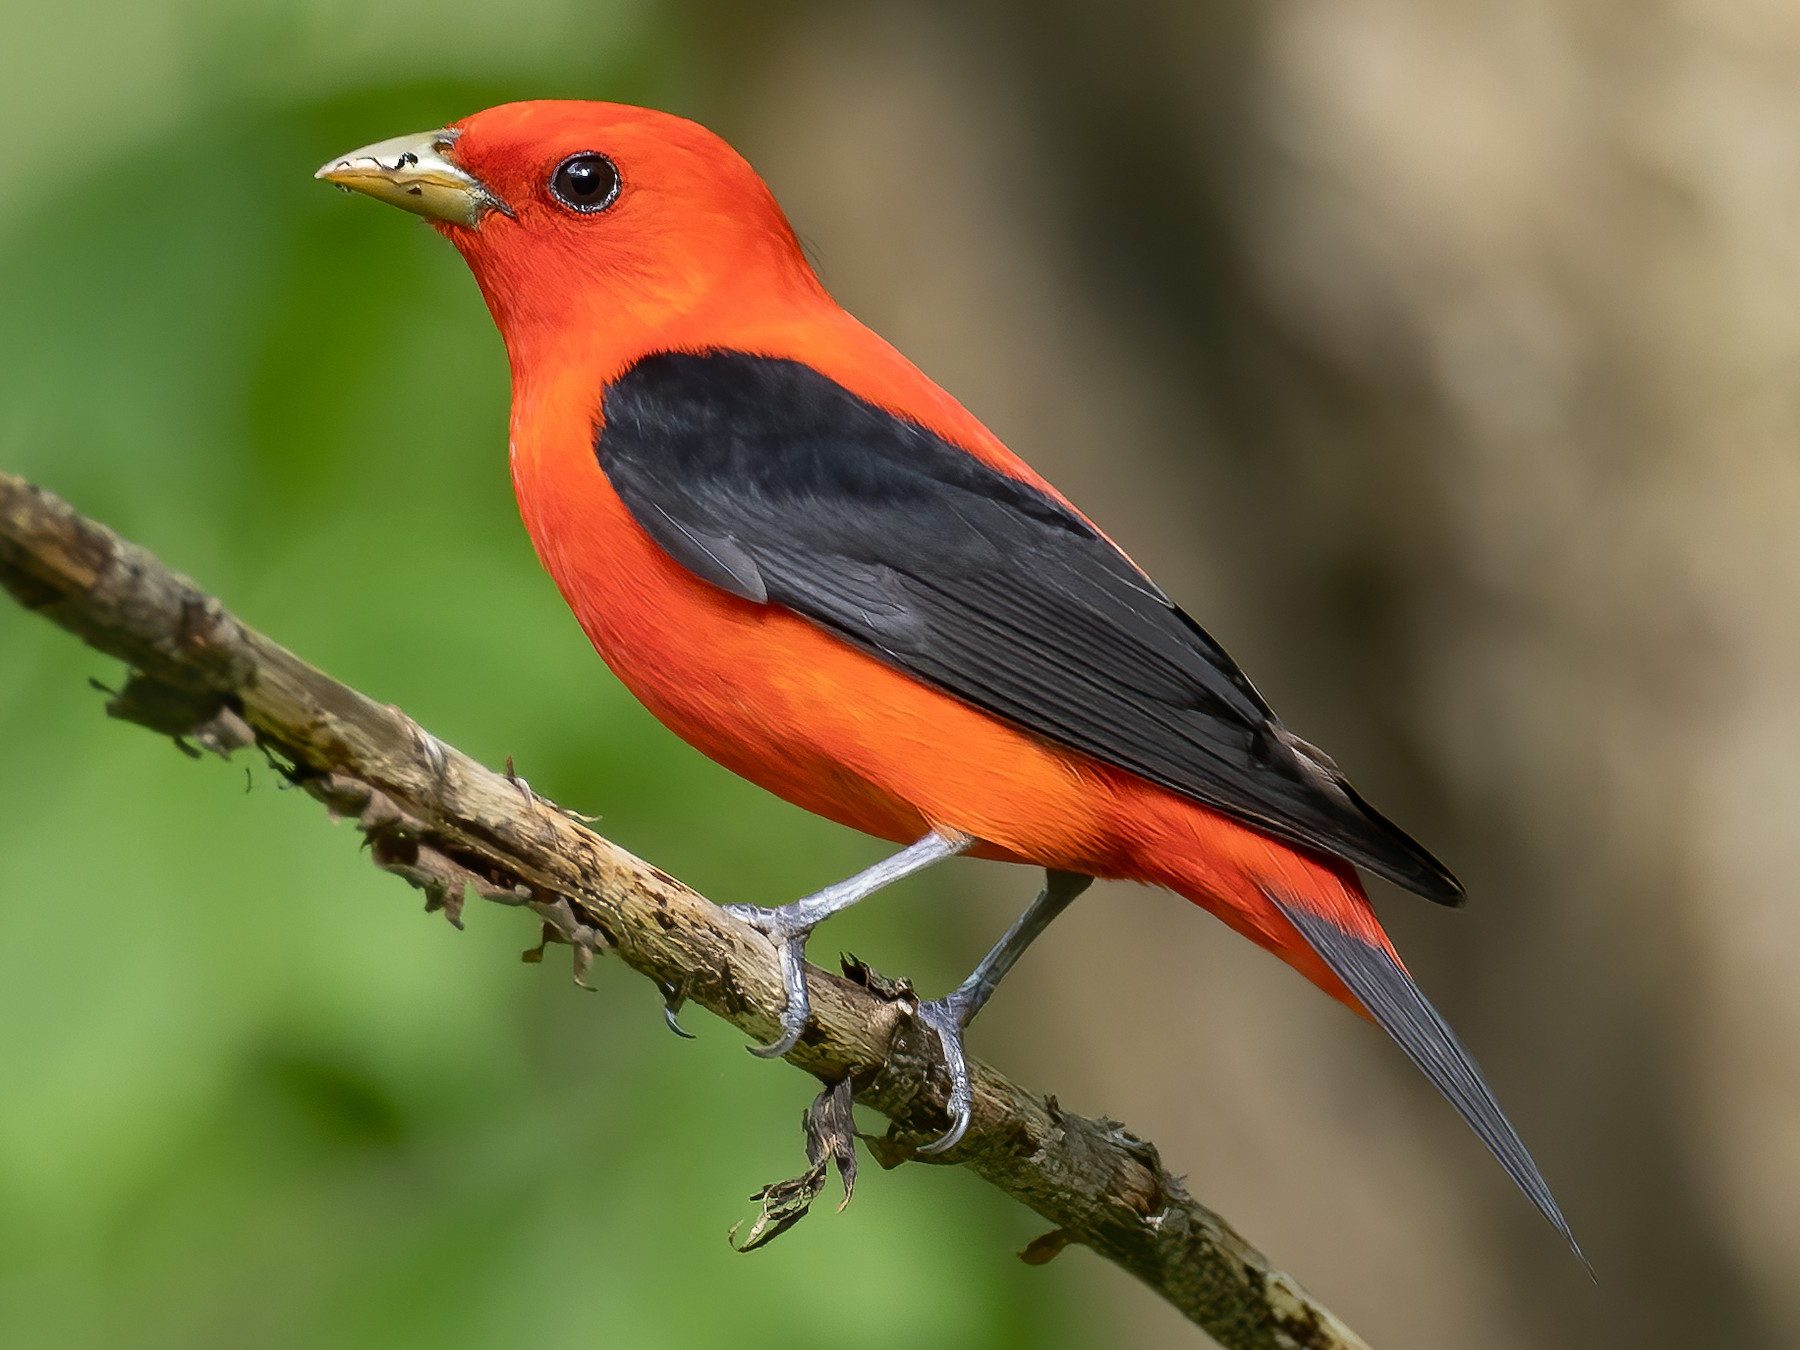 Scarlet Tanager - a small bird with orange/red feathers and black wings